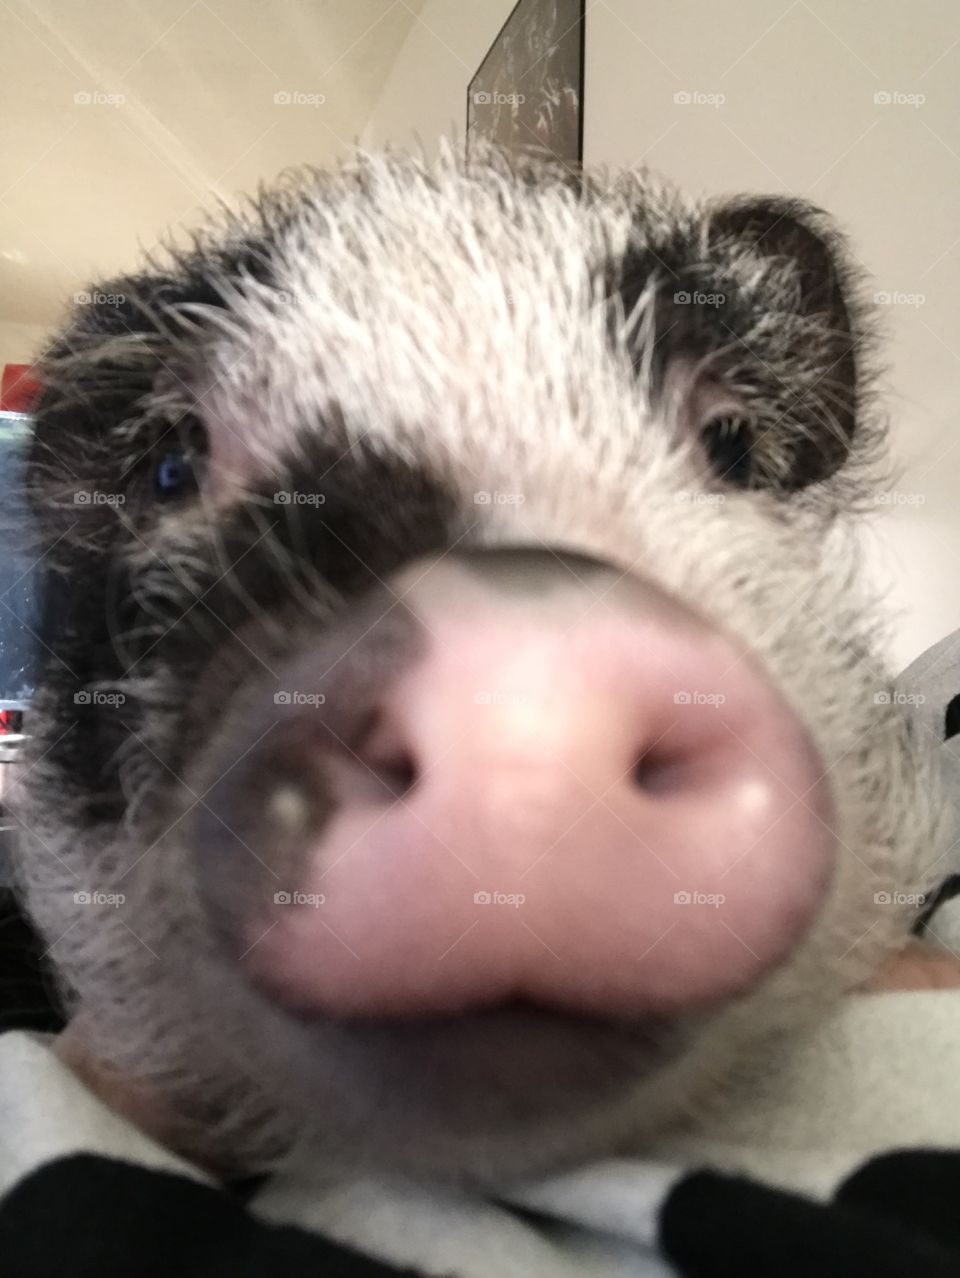 Must boop the camera!